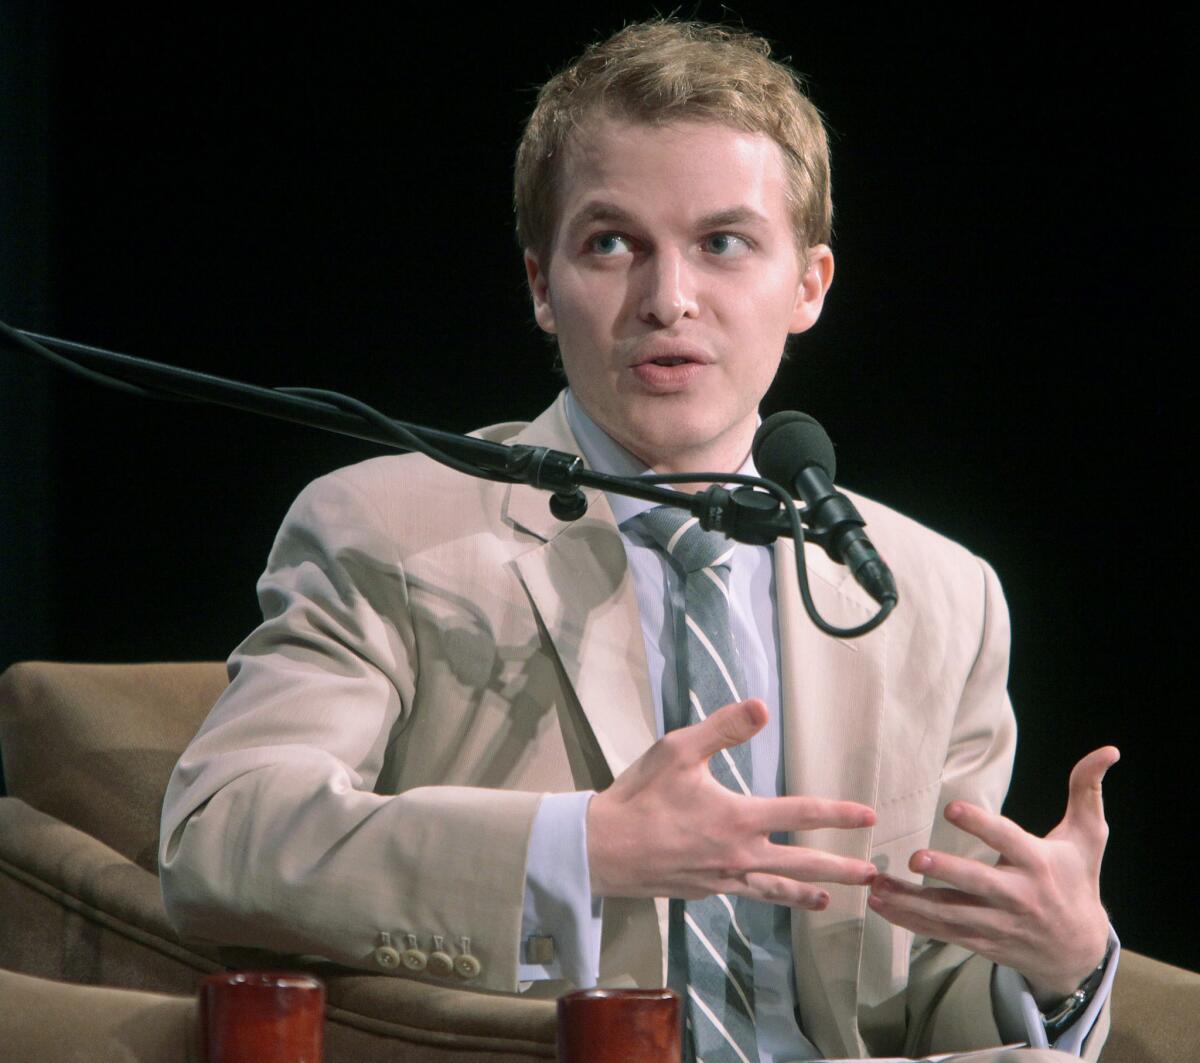 Ronan Farrow, at 25 an activist, attorney and former government official, will host a show on MSNBC in 2014 and is writing a book about the unintended consequences of American military aid.